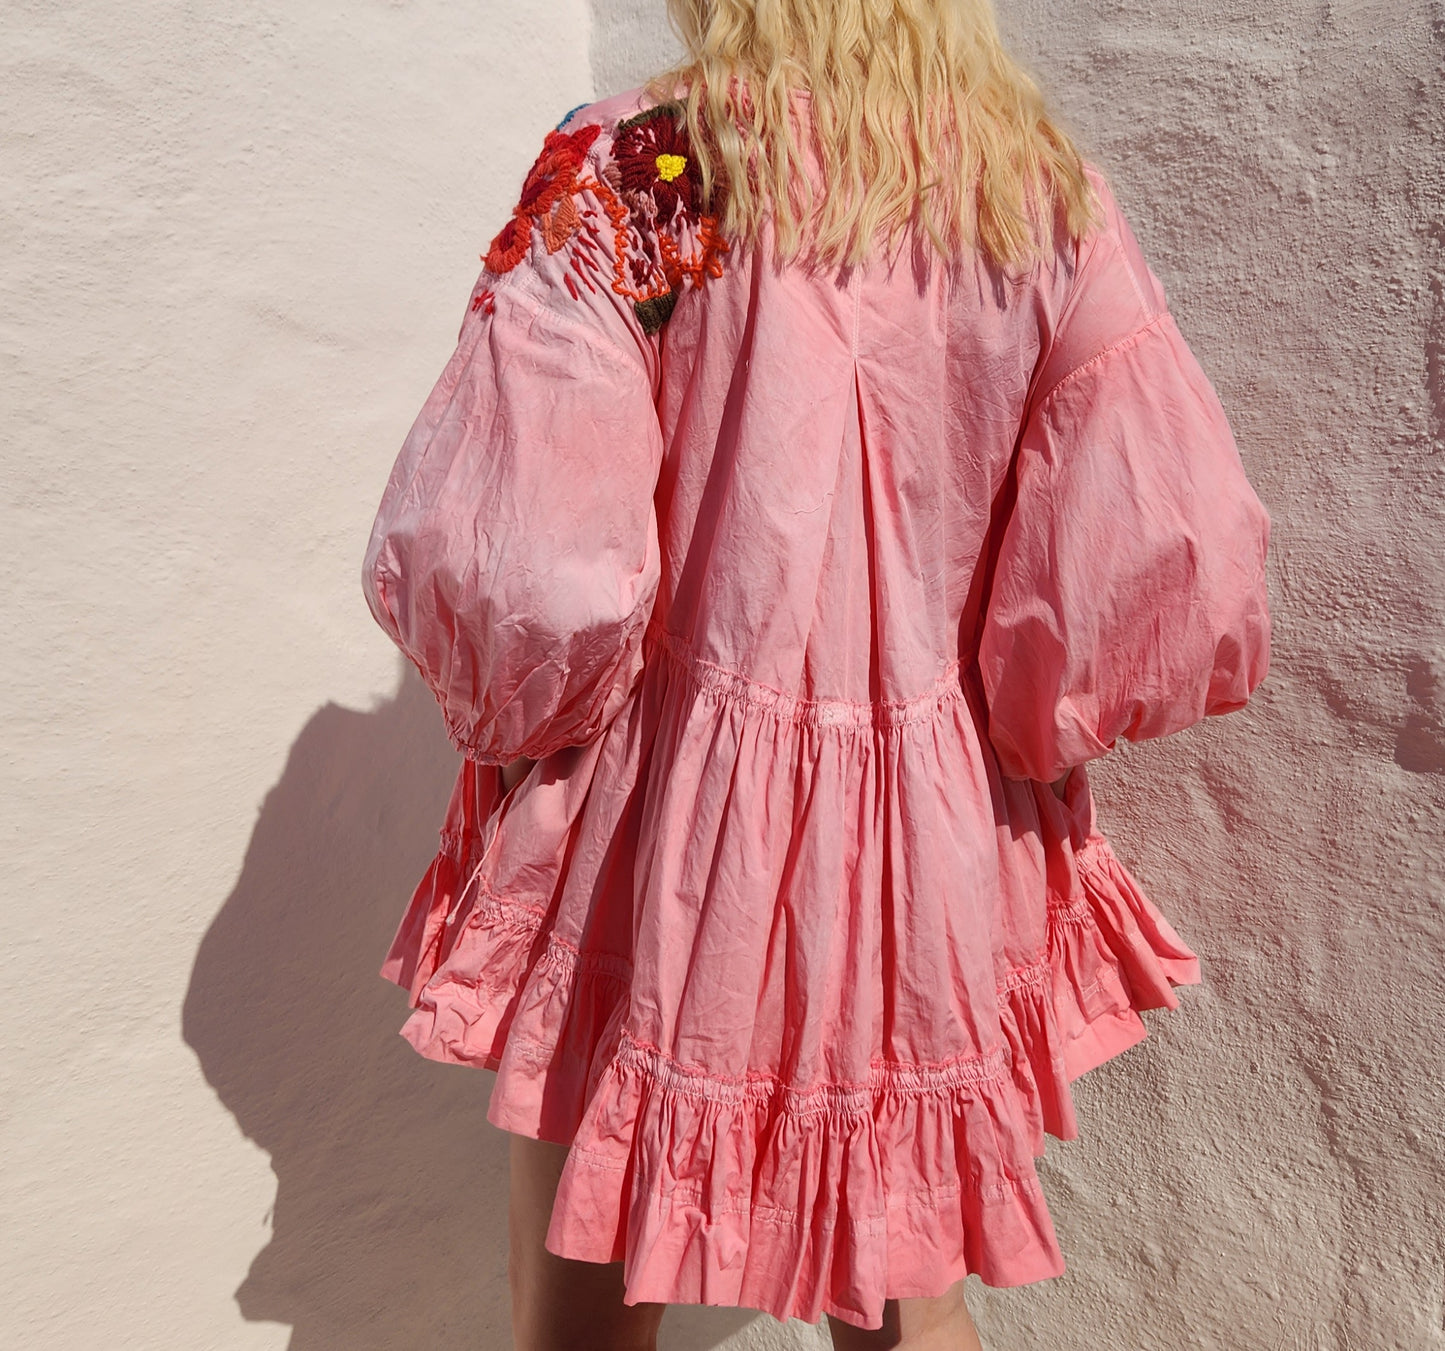 HAND DYED COTTON WRAP DRESS - Pink 02